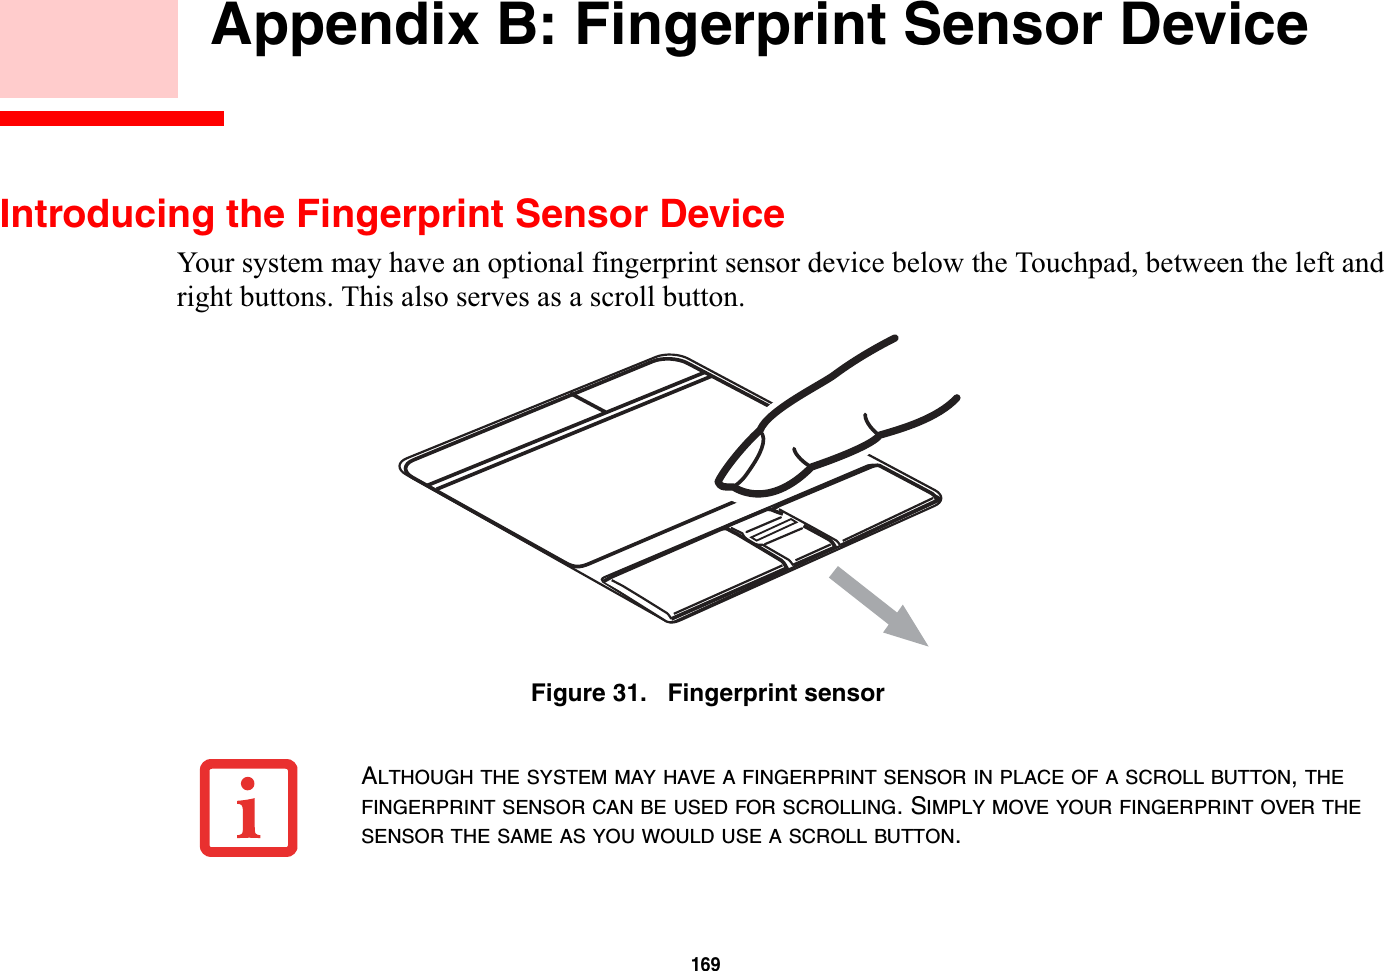 169 Appendix B: Fingerprint Sensor DeviceIntroducing the Fingerprint Sensor DeviceYour system may have an optional fingerprint sensor device below the Touchpad, between the left and right buttons. This also serves as a scroll button. Figure 31.   Fingerprint sensorALTHOUGH THE SYSTEM MAY HAVE A FINGERPRINT SENSOR IN PLACE OF A SCROLL BUTTON,THEFINGERPRINT SENSOR CAN BE USED FOR SCROLLING. SIMPLY MOVE YOUR FINGERPRINT OVER THESENSOR THE SAME AS YOU WOULD USE A SCROLL BUTTON.